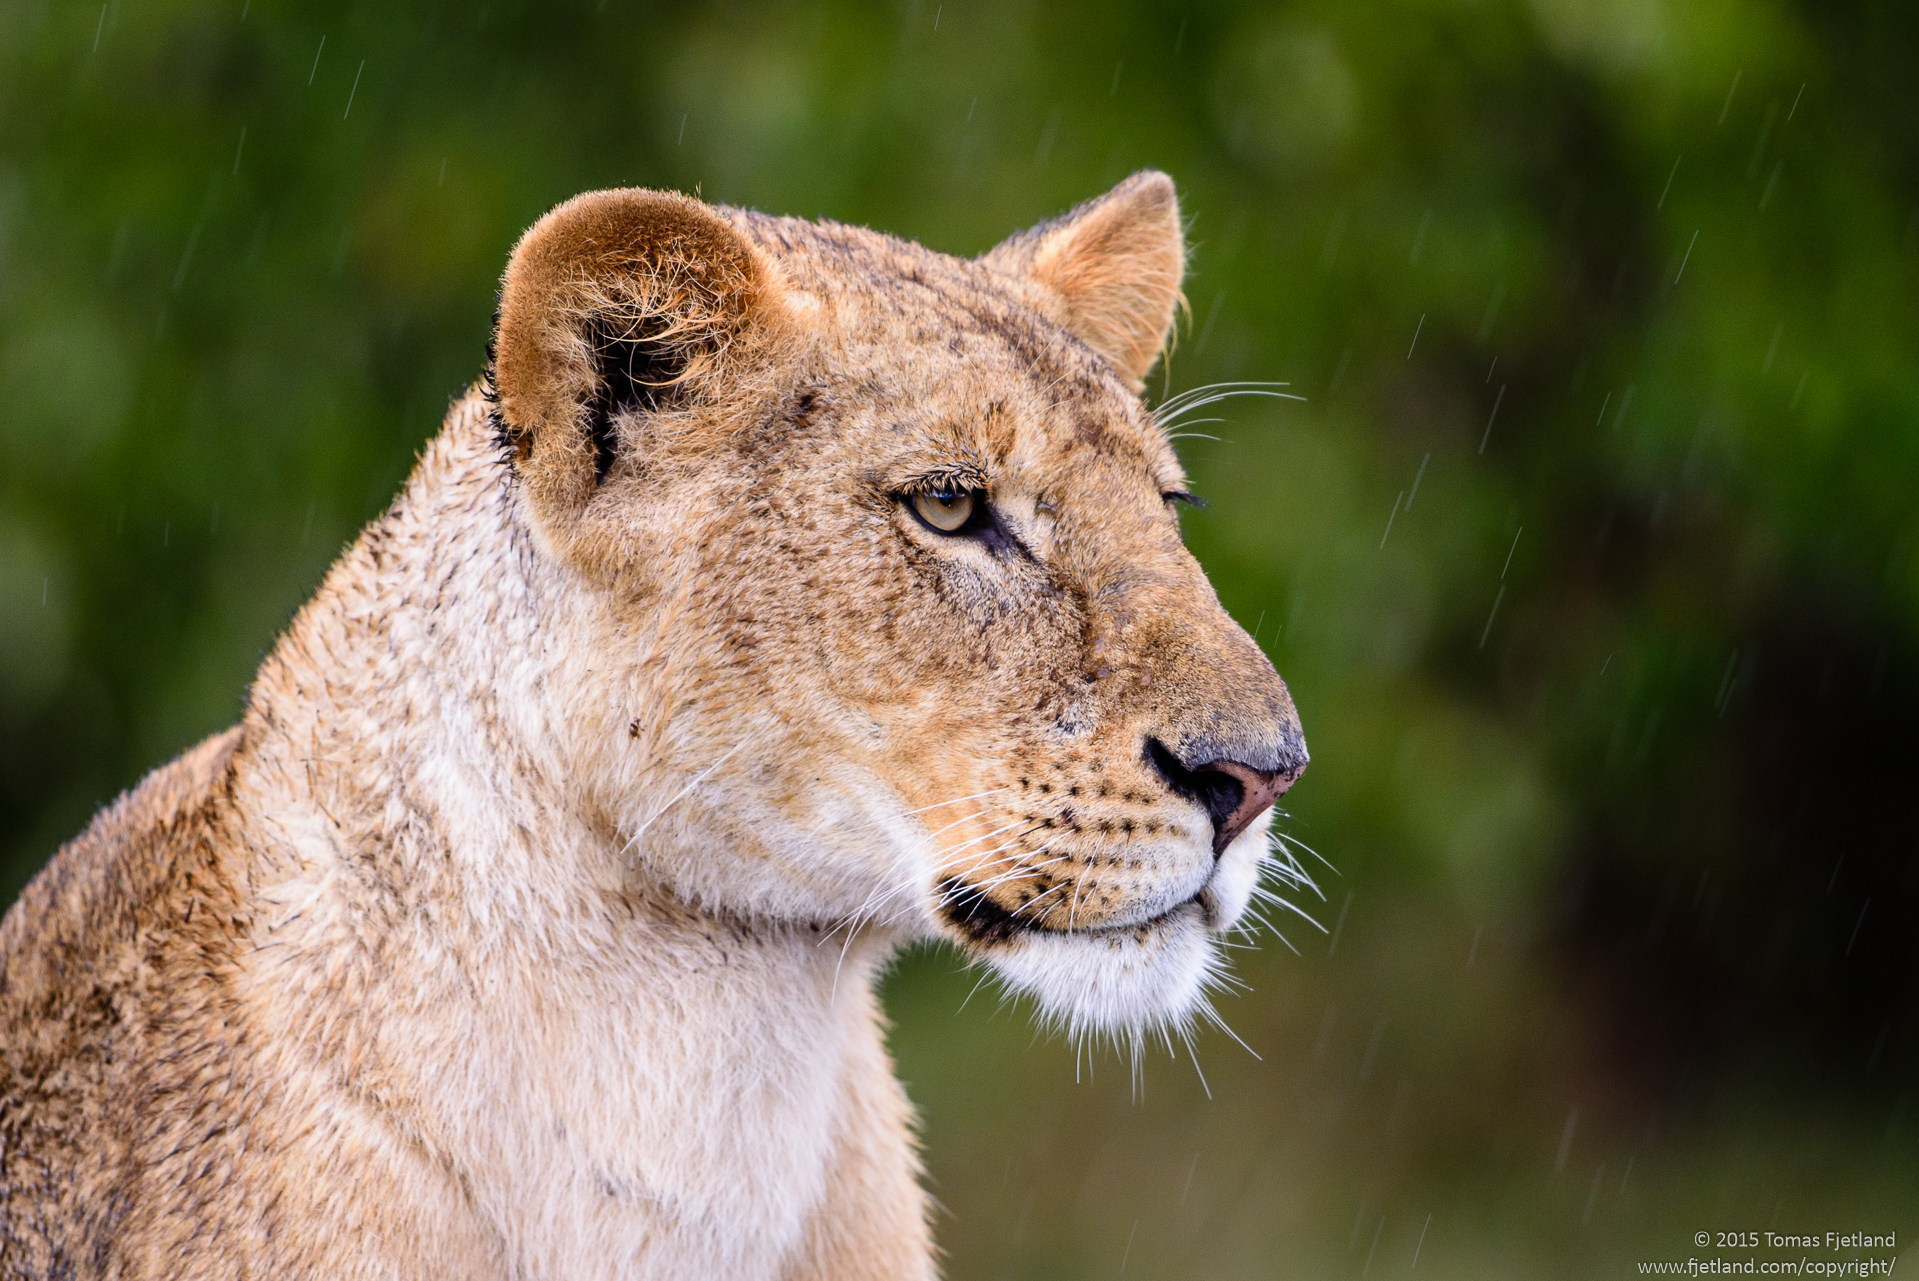 Lioness in the rain. Not amused